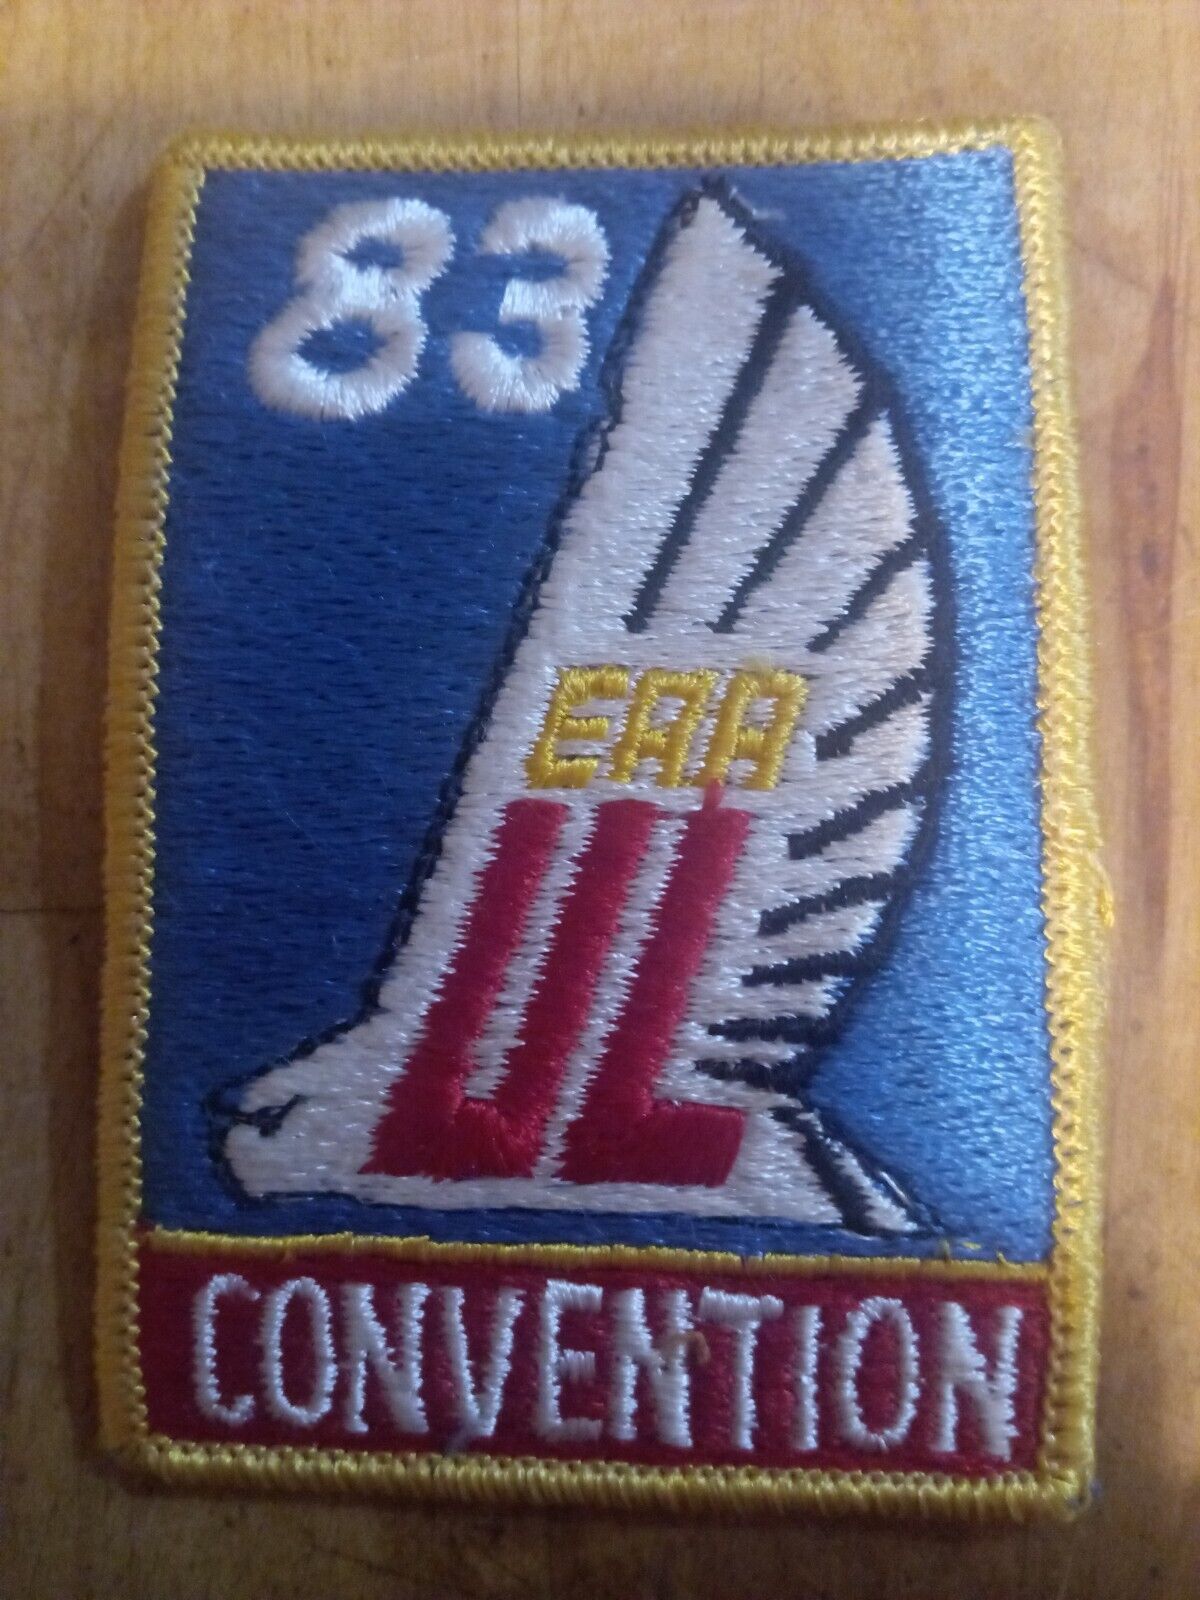 1983 EAA UL Convention Patch. Nice Patch  Great Condition.